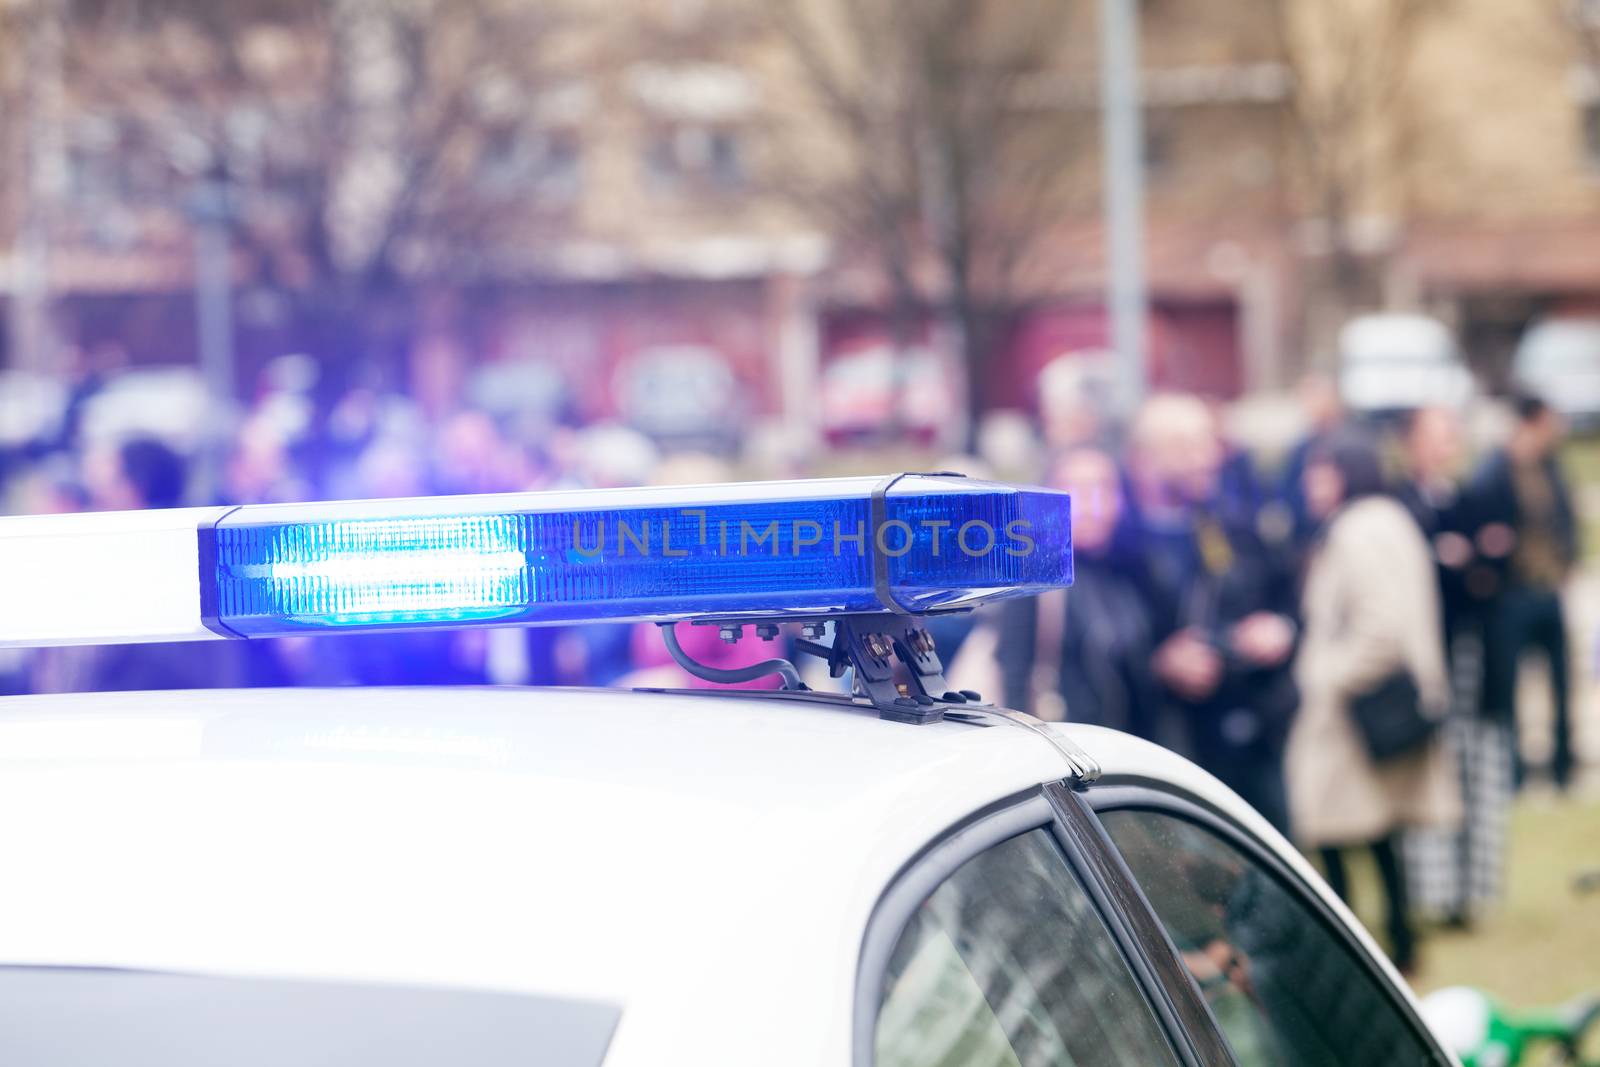 Police car flashing lights in focus, blurred crowd in background by wellphoto